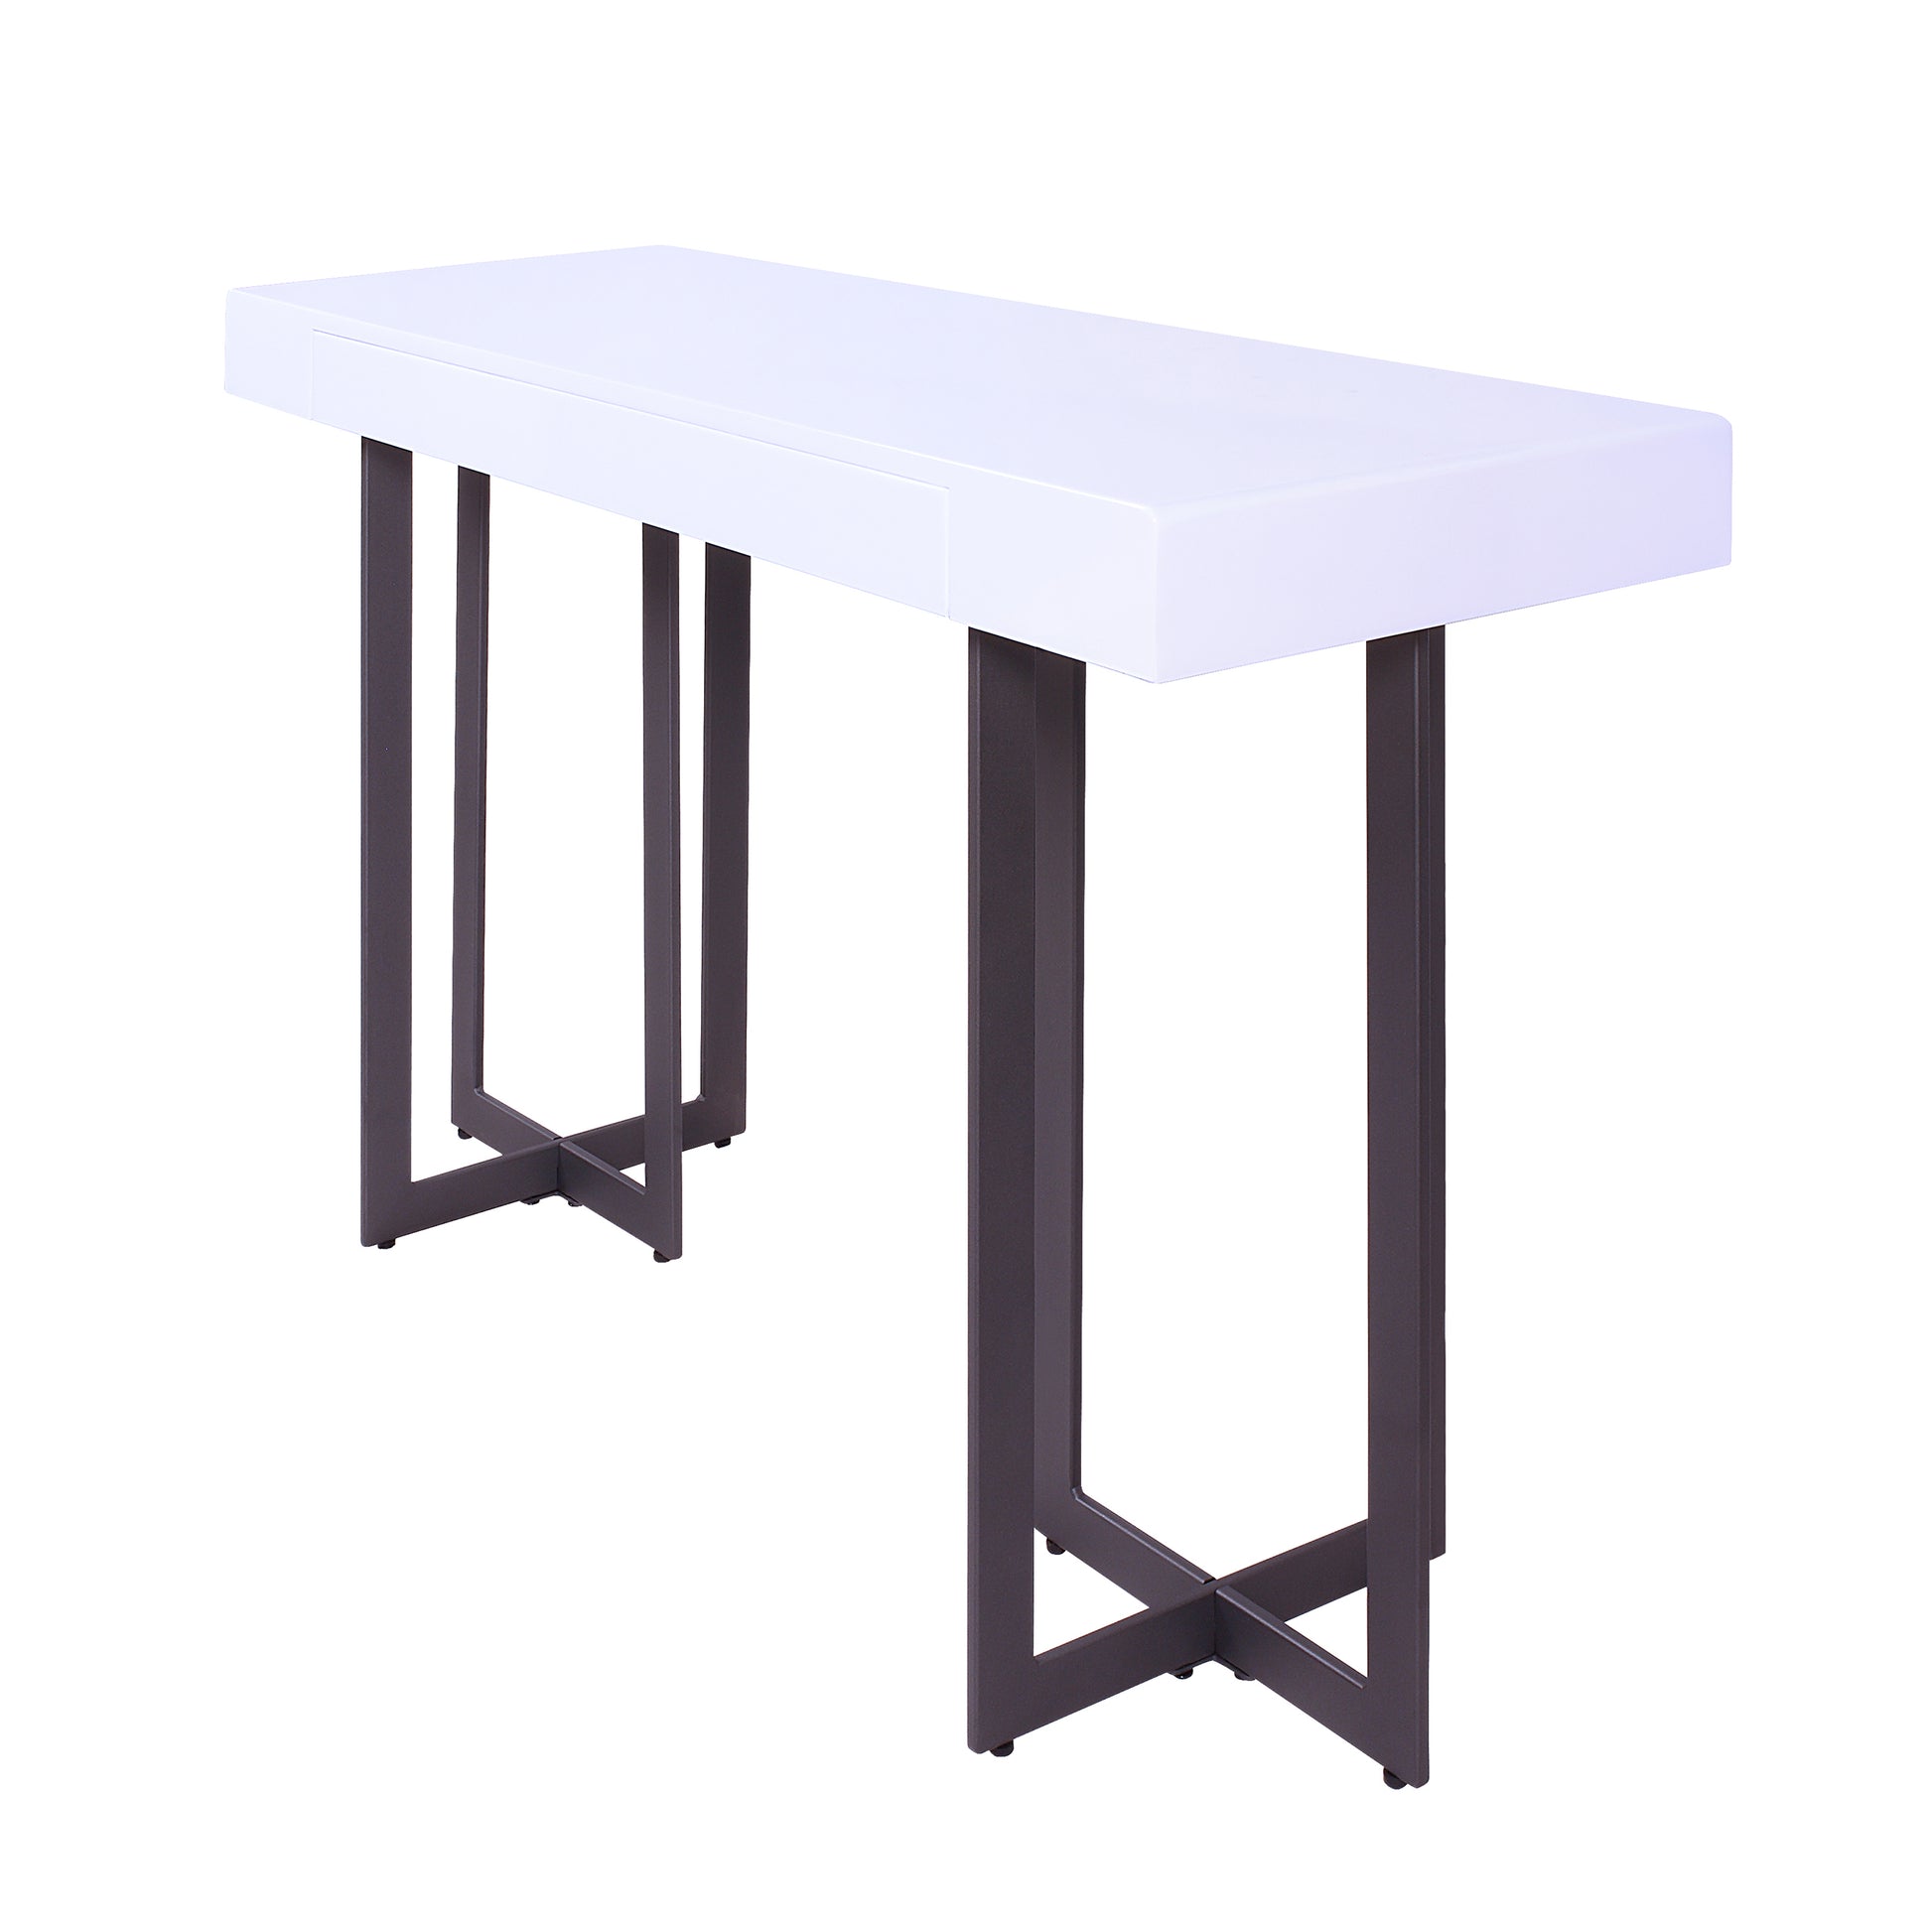 Left angled console table only from a three-piece modern white high gloss and gunmetal storage coffee table set with hidden drawers open on a white background